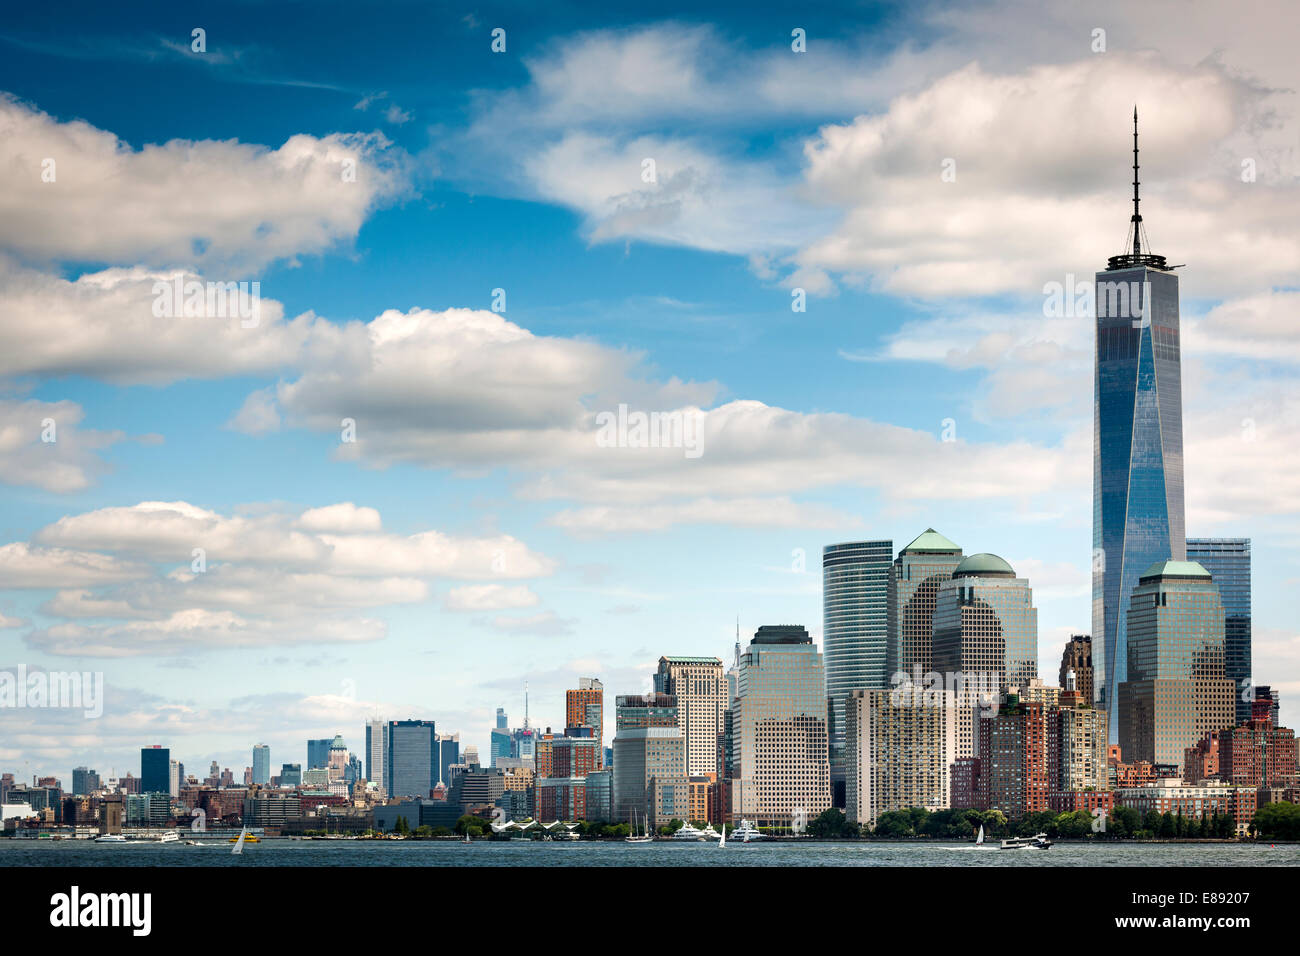 The Freedom Tower rises above Battery Park, Downtown Manhattan, New York Stock Photo